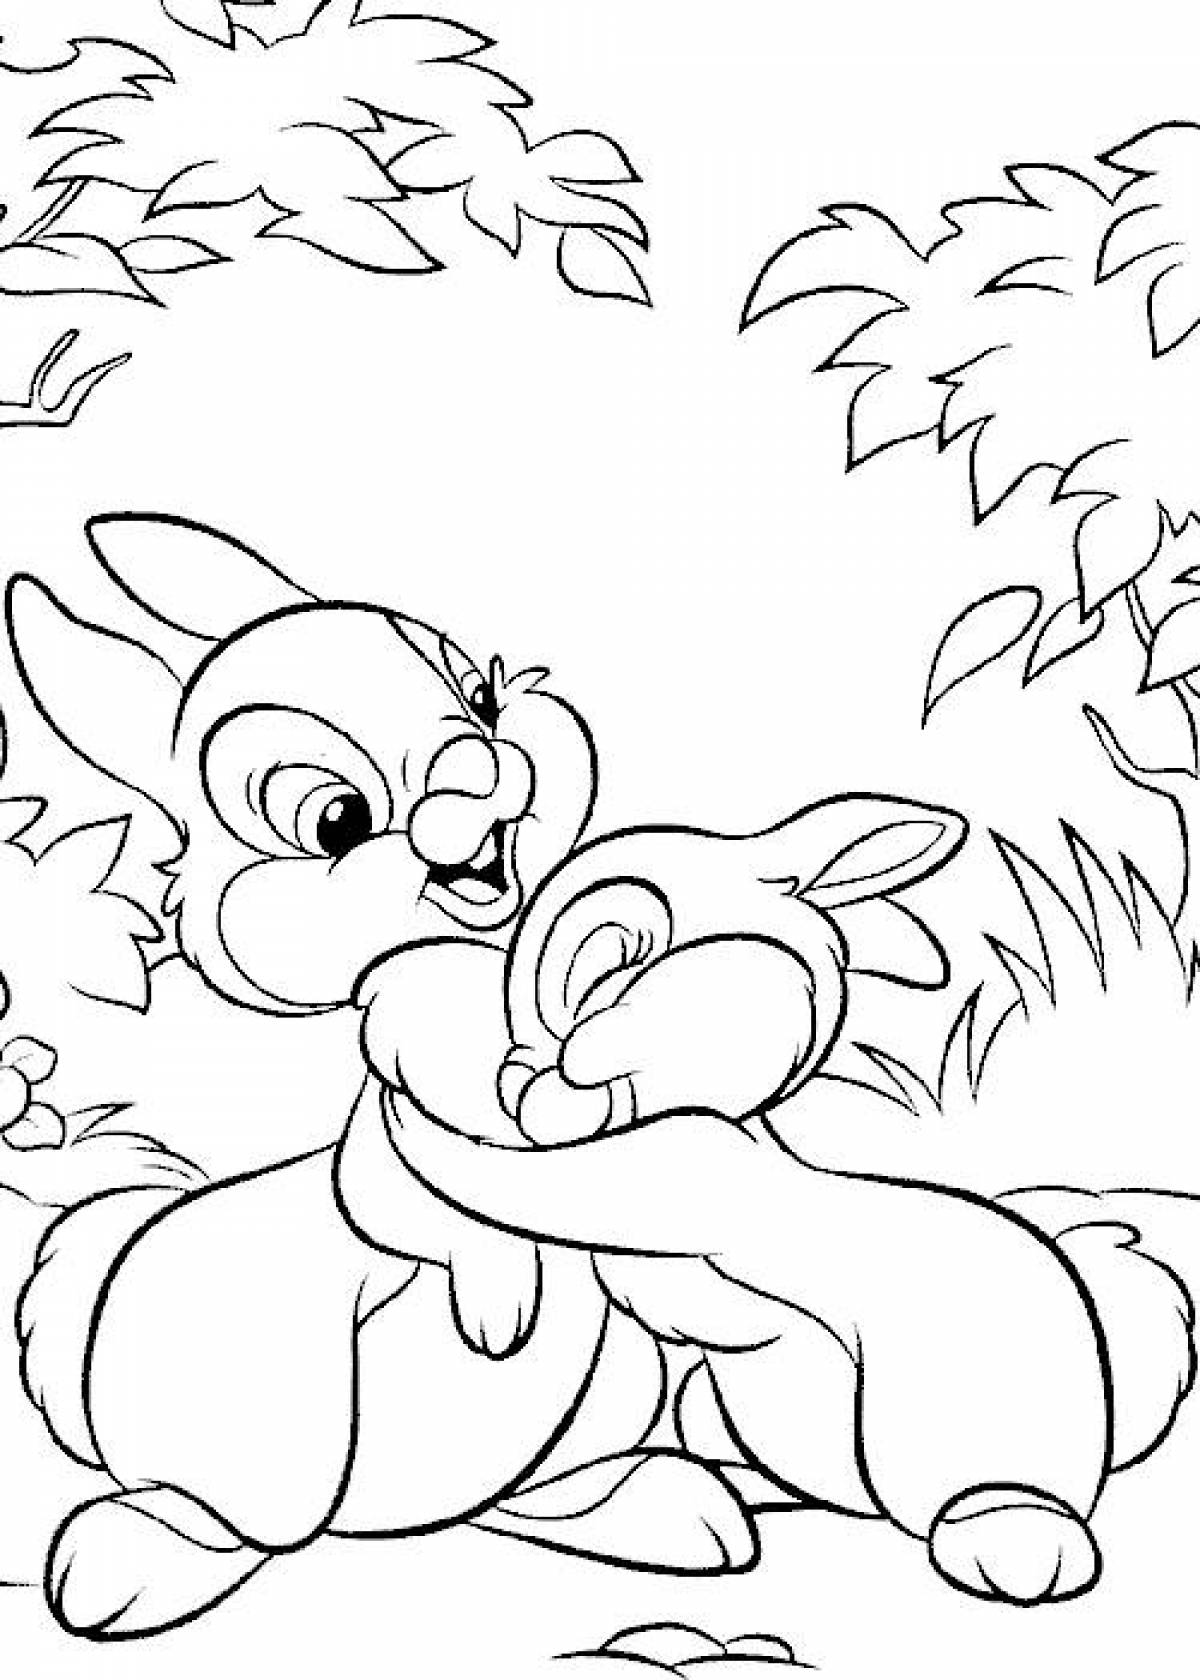 Hare coloring page